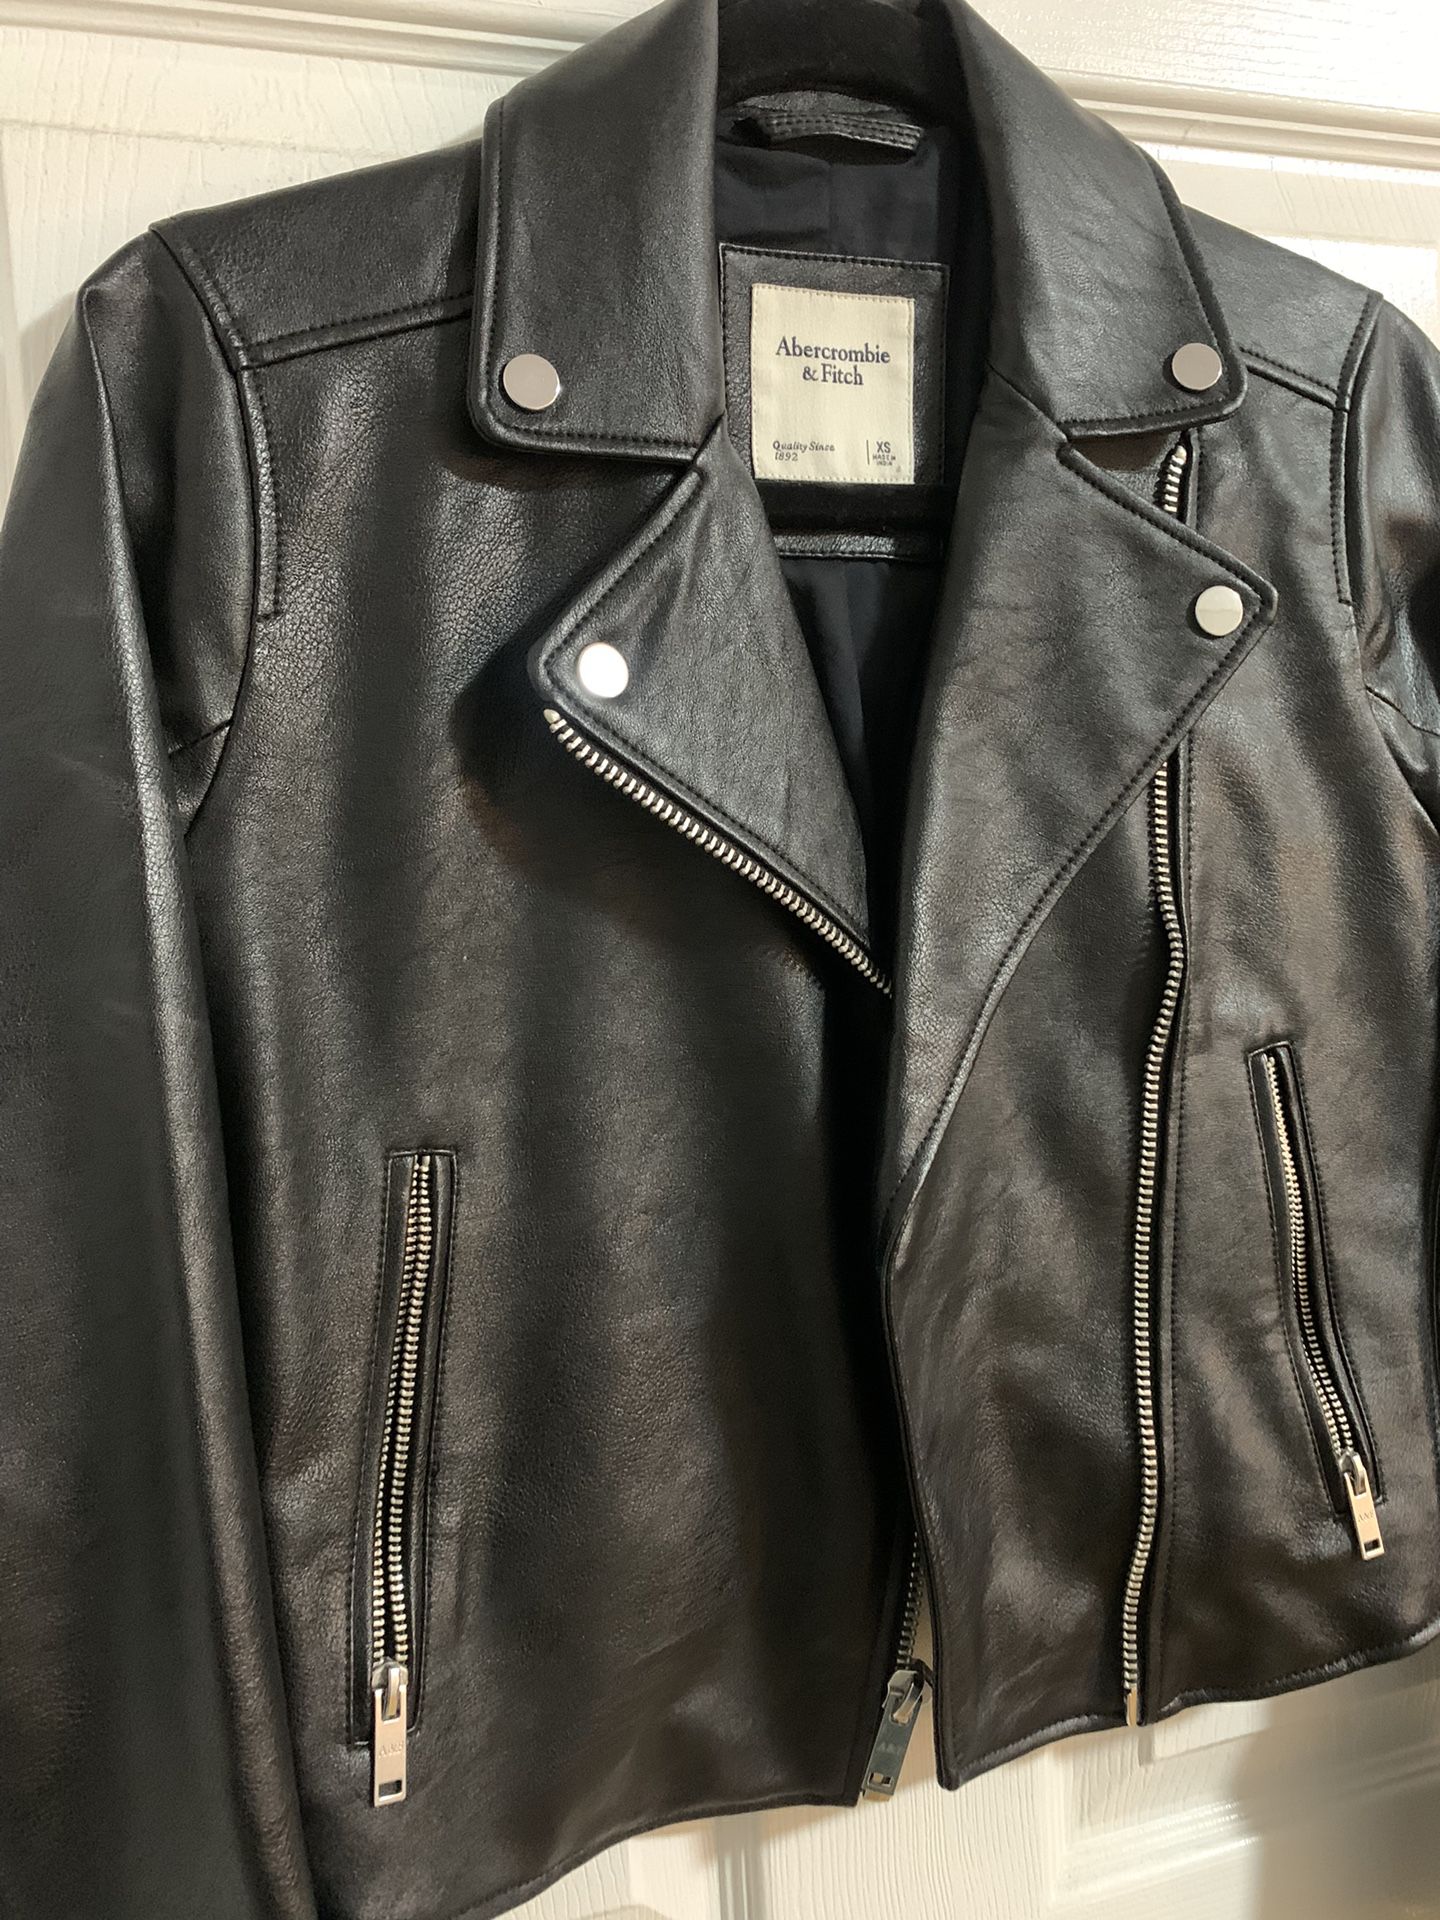 Abercrombie & Fitch leather Jacket